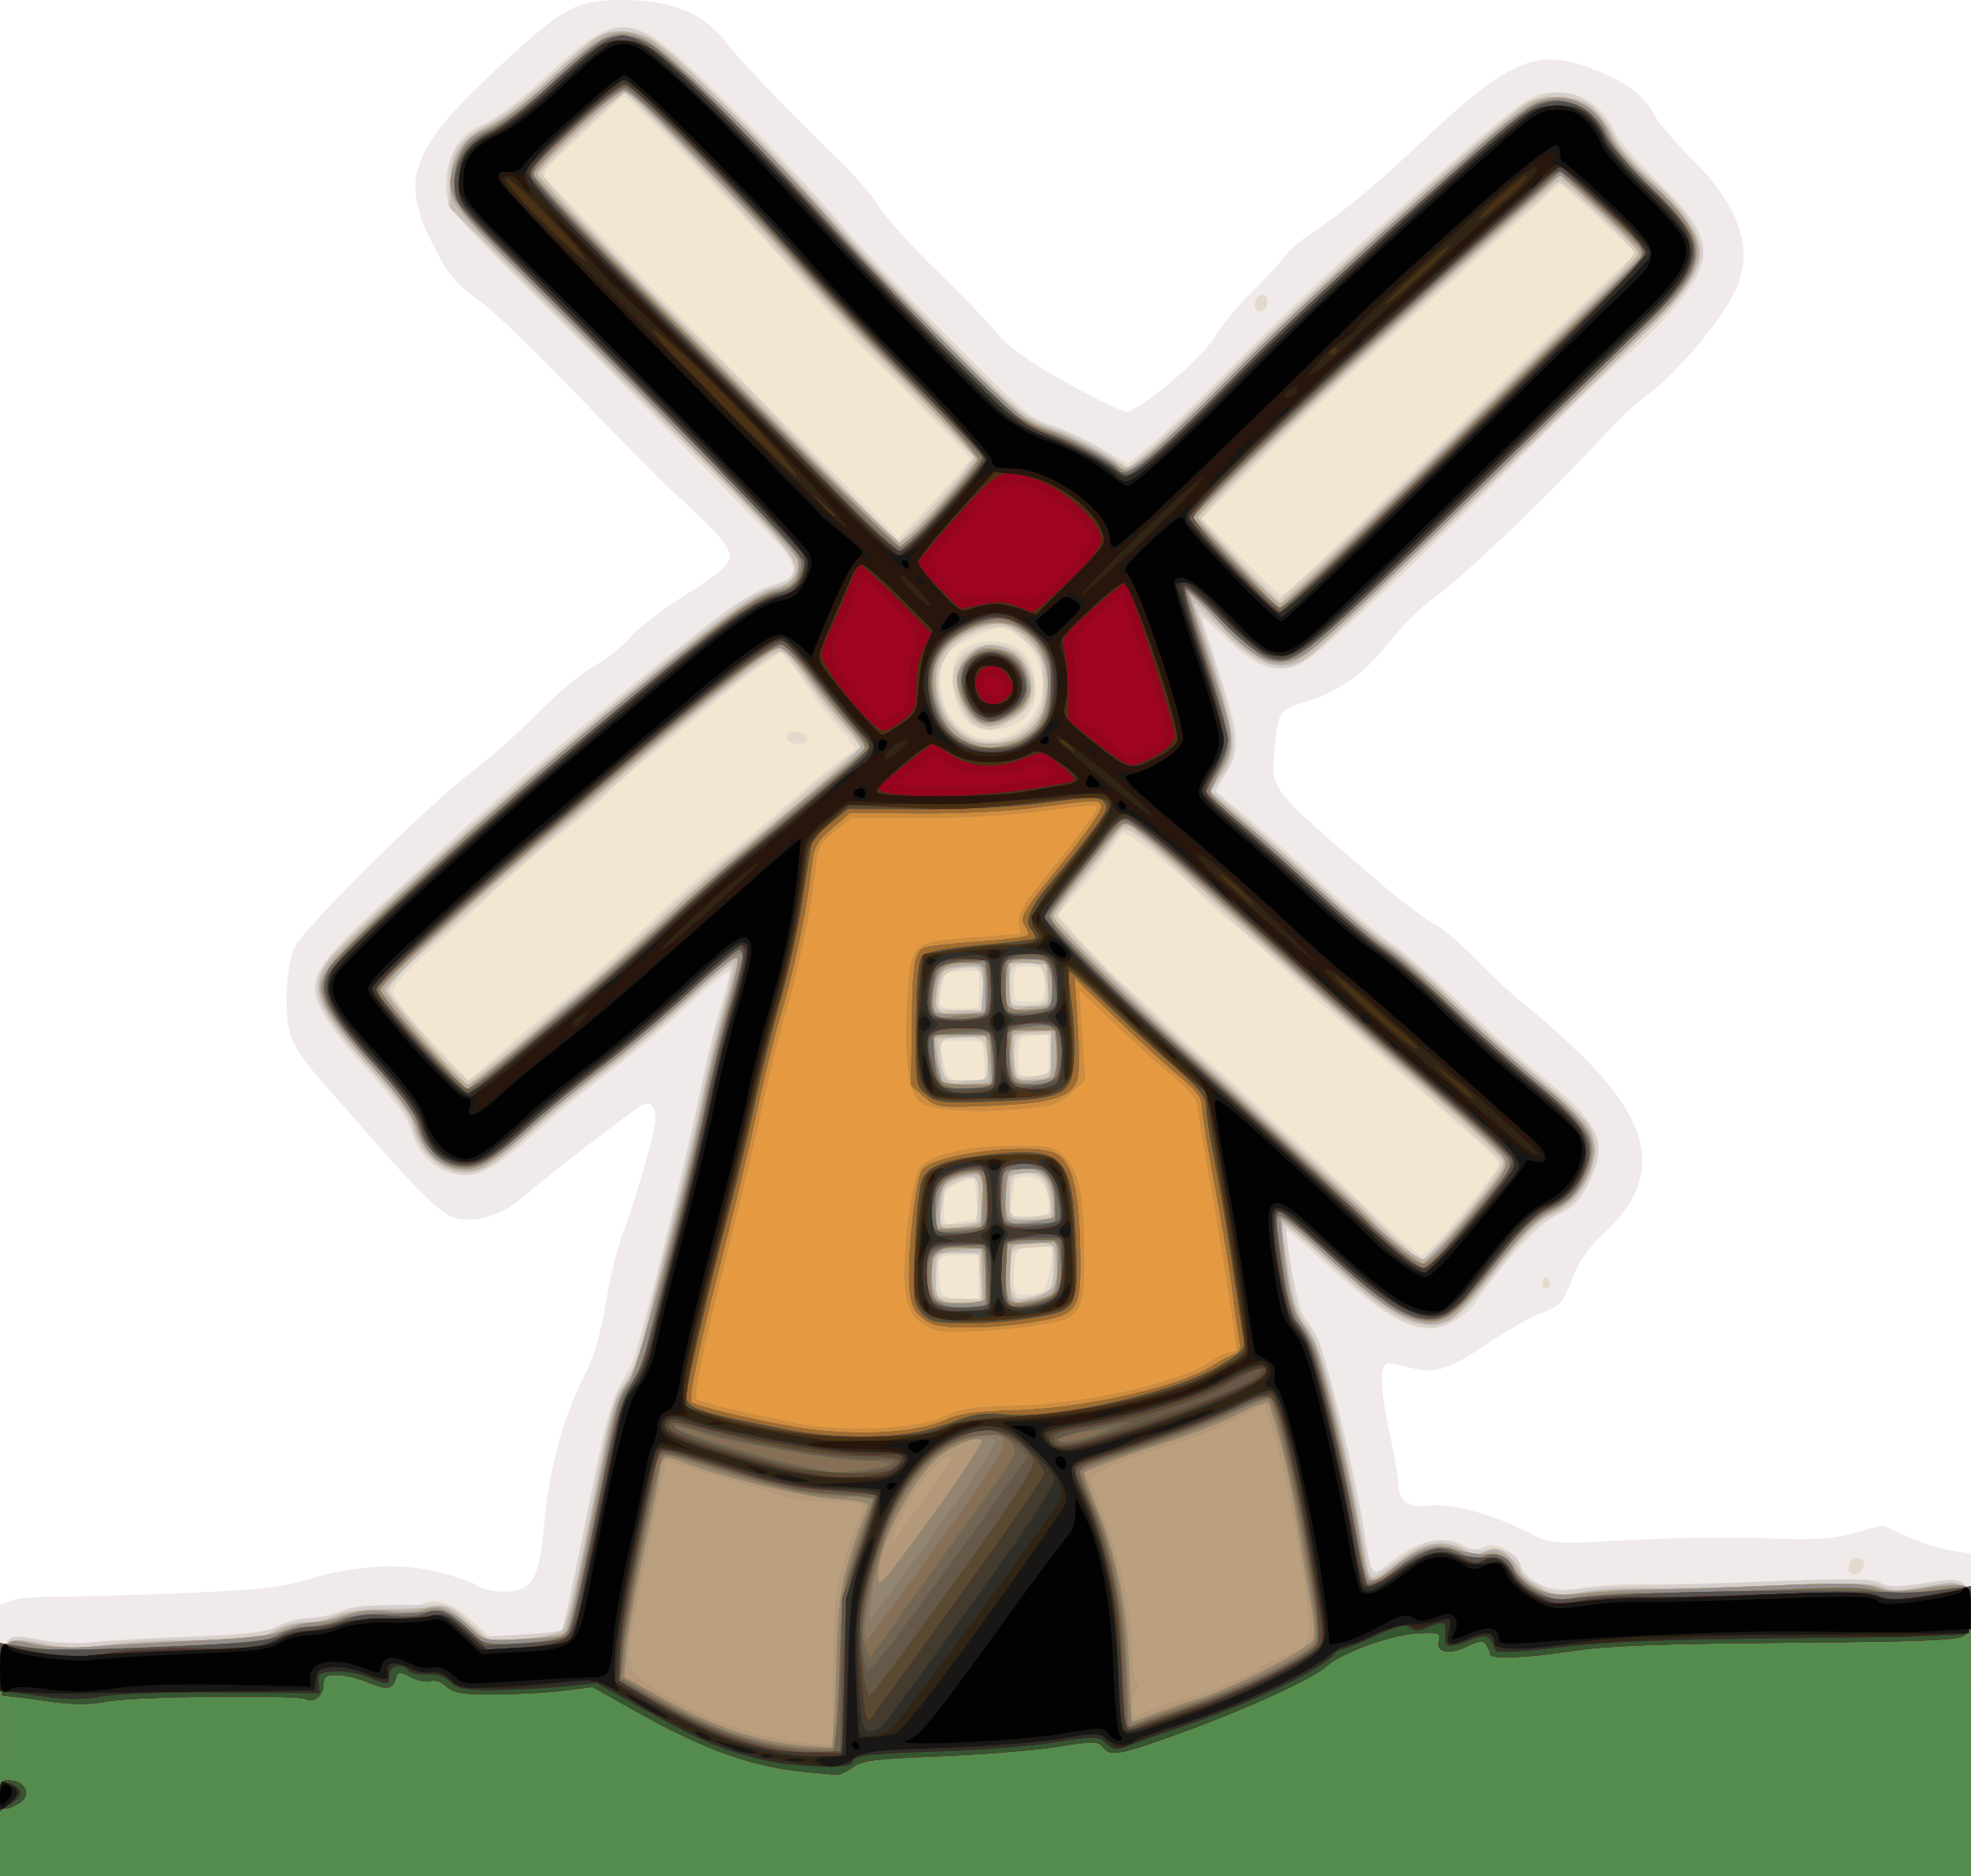 Big Image - Clipart Of Wind Mill (2400x2284)